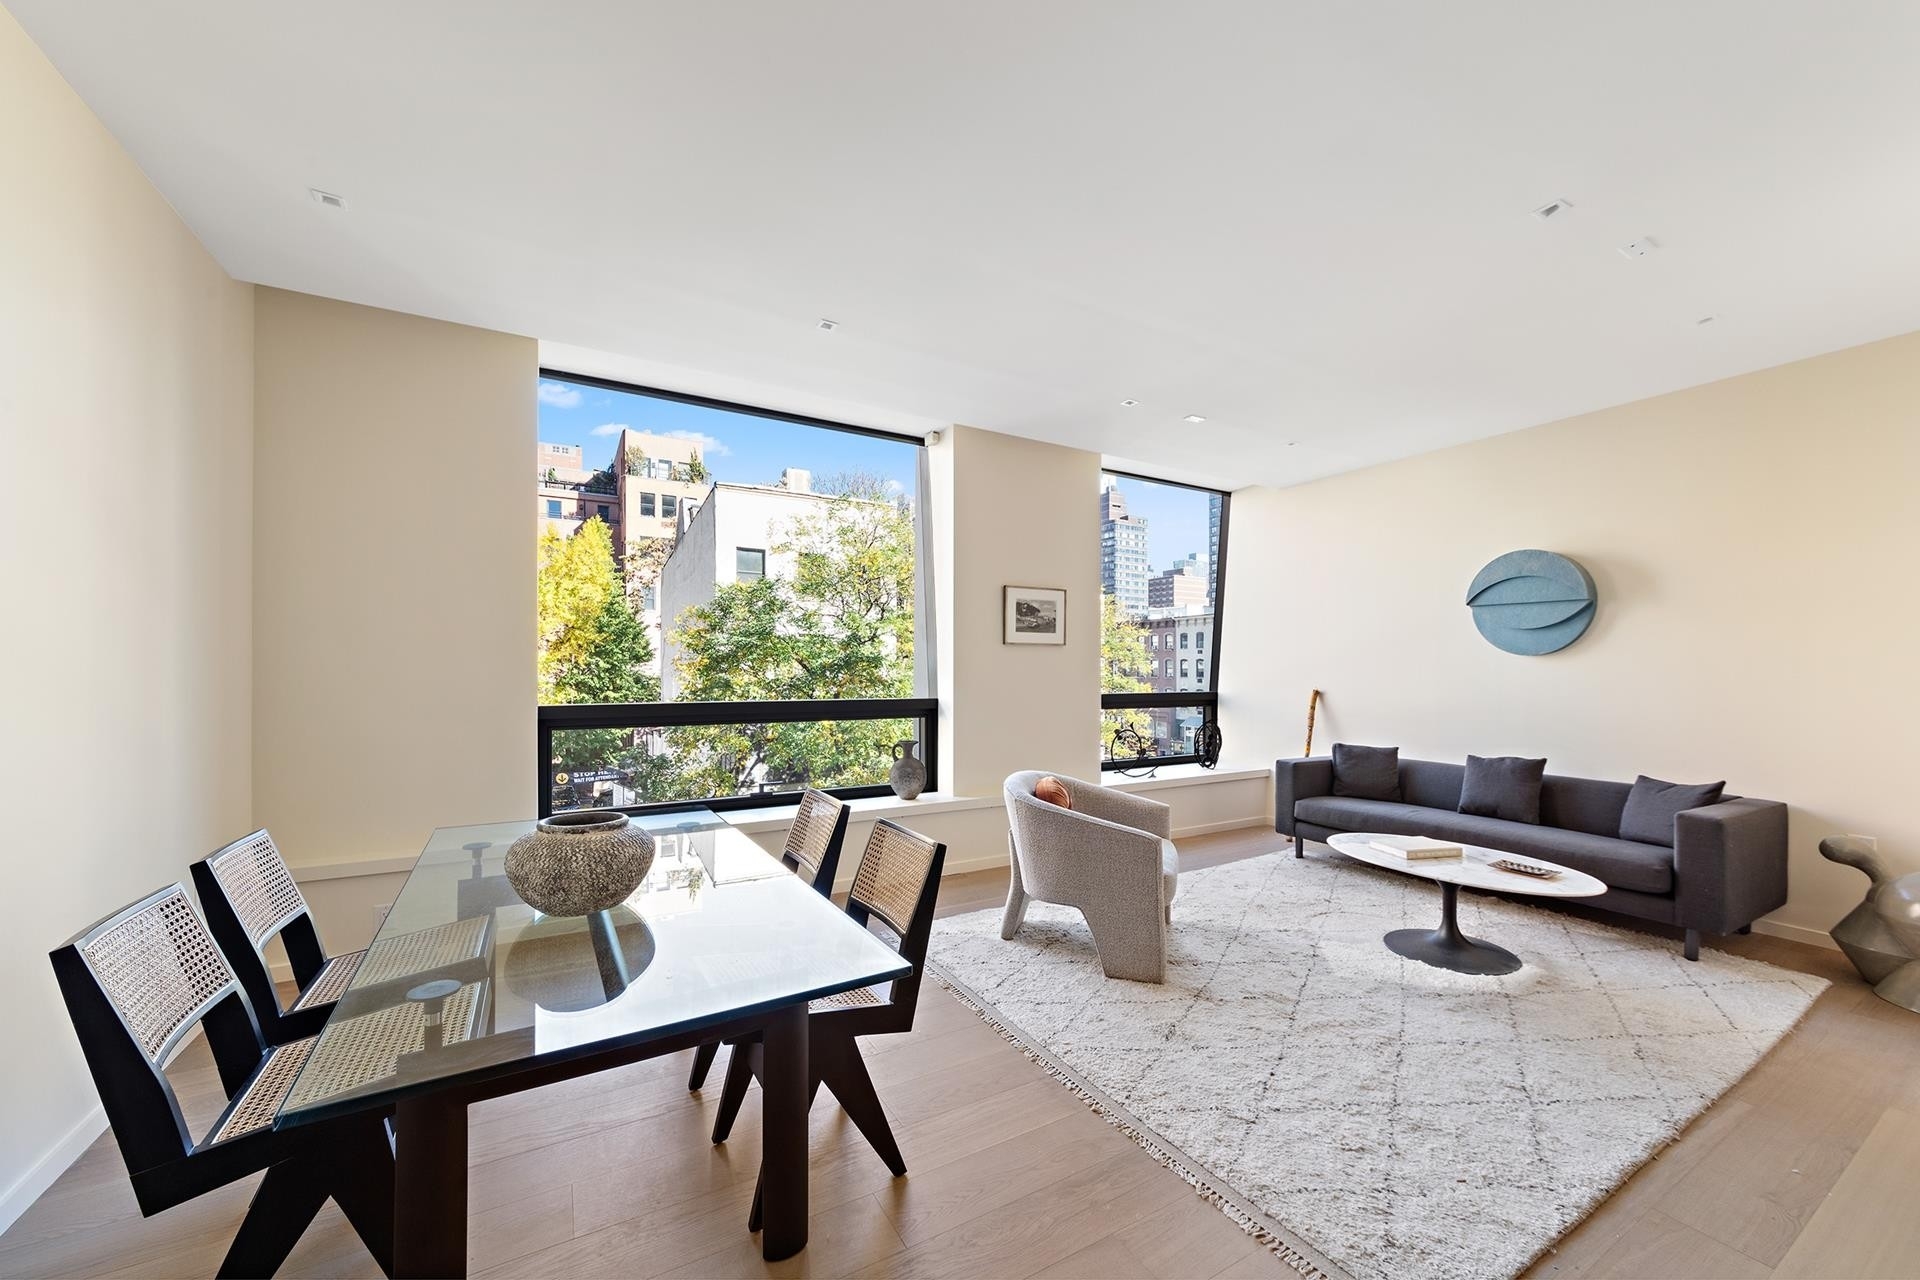 Condominium for Sale at 128 E 28TH ST, 3A NoMad, New York, NY 10016